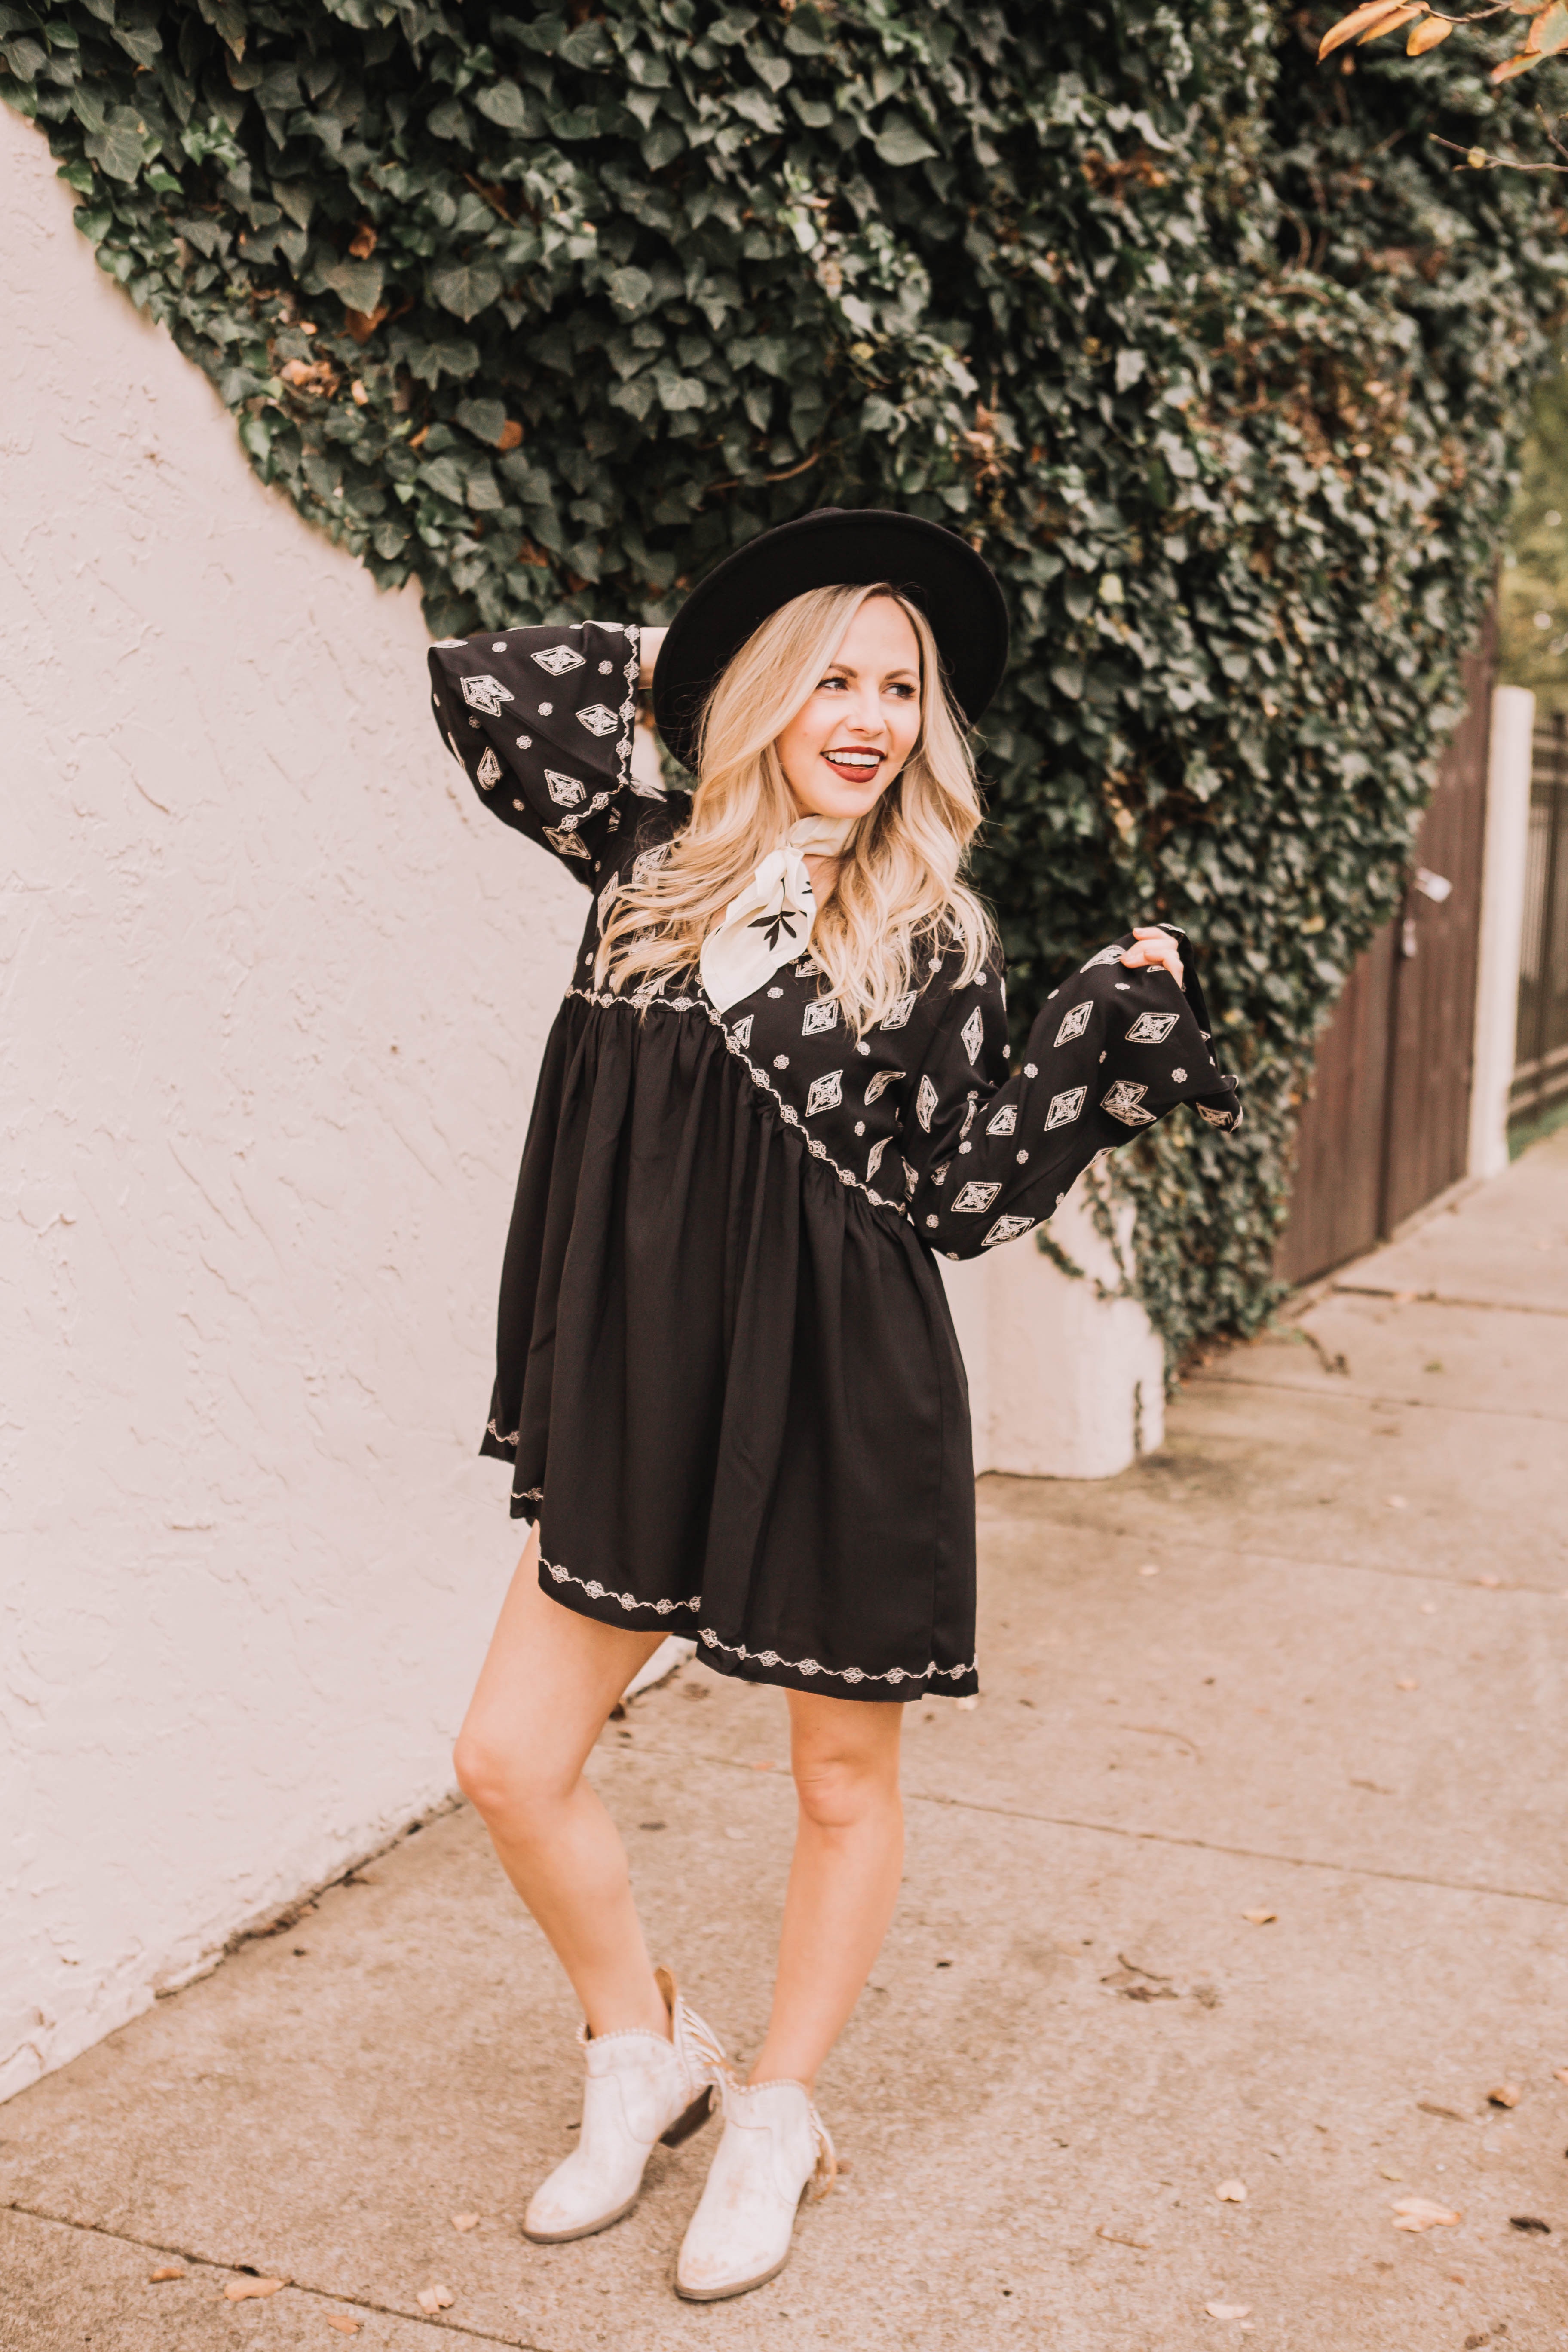 Cowboy Boots for Women by popular Nashville fashion blog, Nashville Wifestyles: image of a woman wearing a black and white mini dress, white bandana tied around her neck, black felt hat and white cowboy ankle boots.